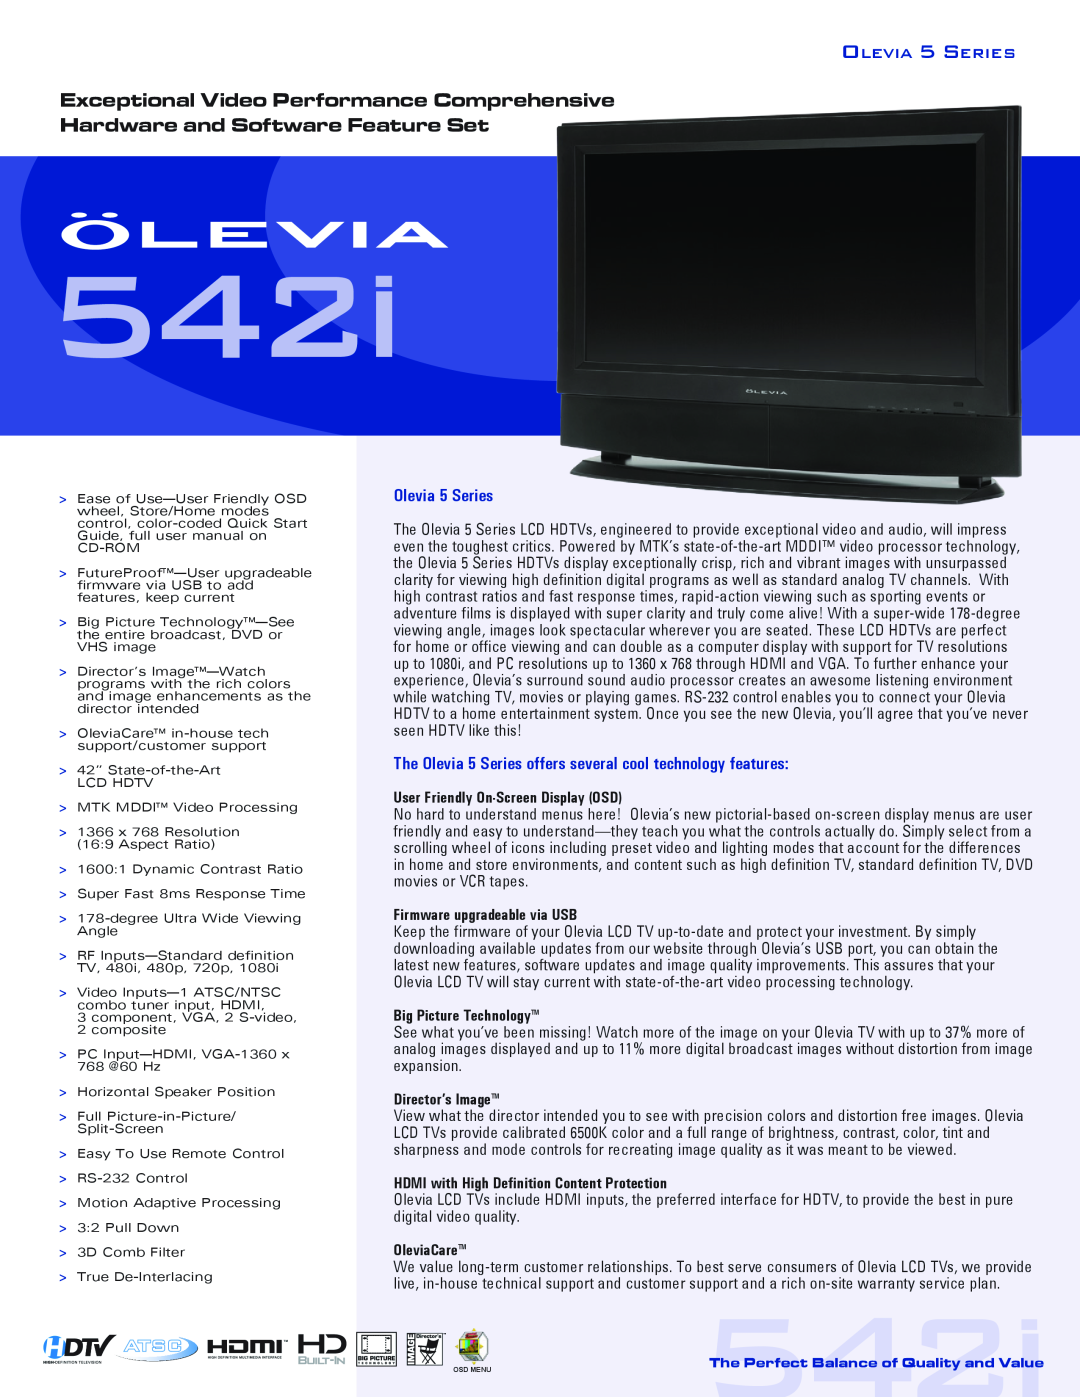 Brilliant Label 542i quick start 542I, Exceptional Video Performance Comprehensive, Hardware and Software Feature Set 